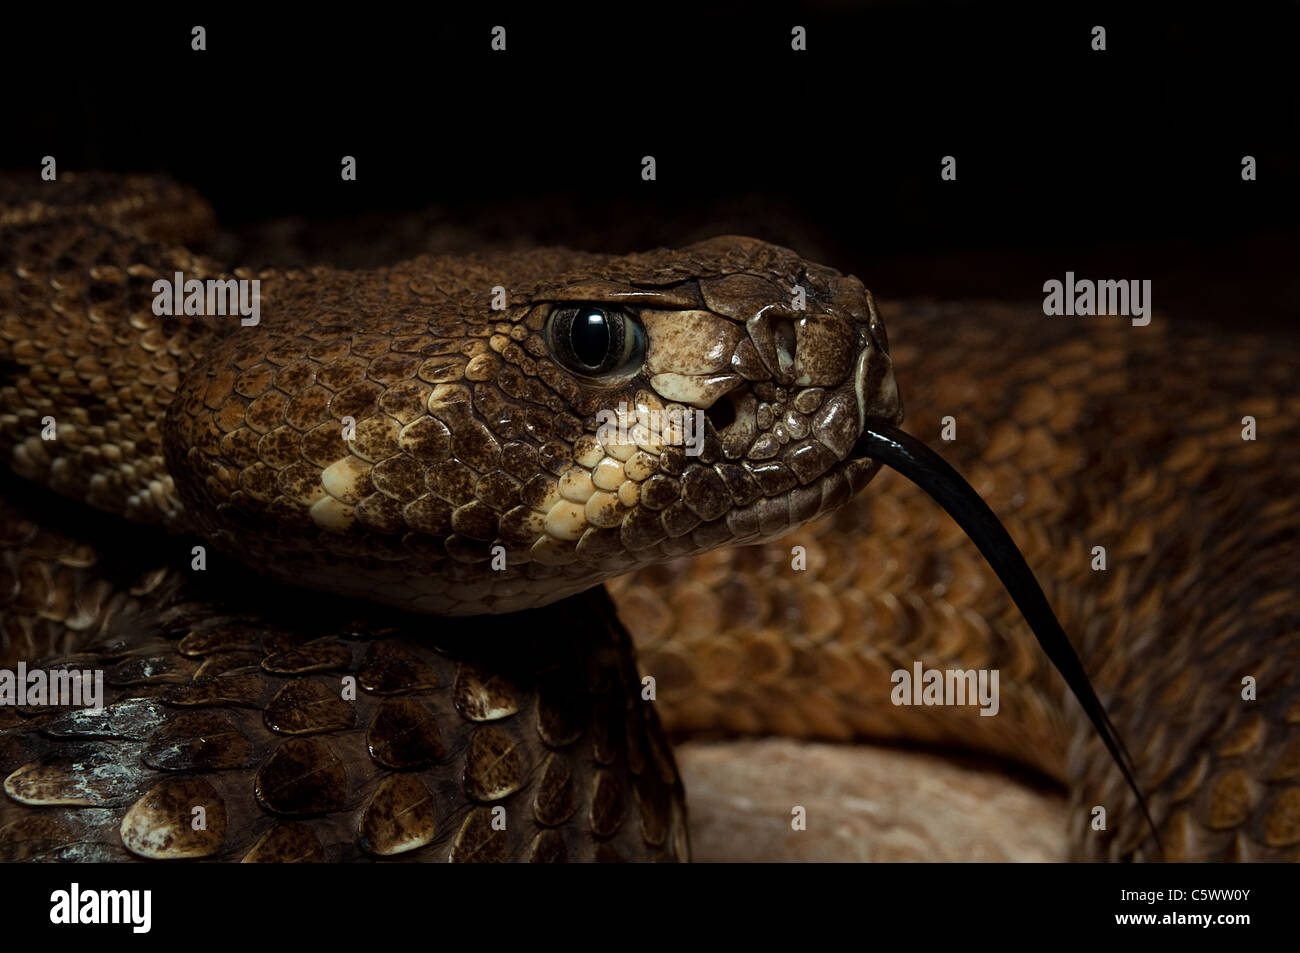 Western Rattlesnake with tongue out Stock Photo